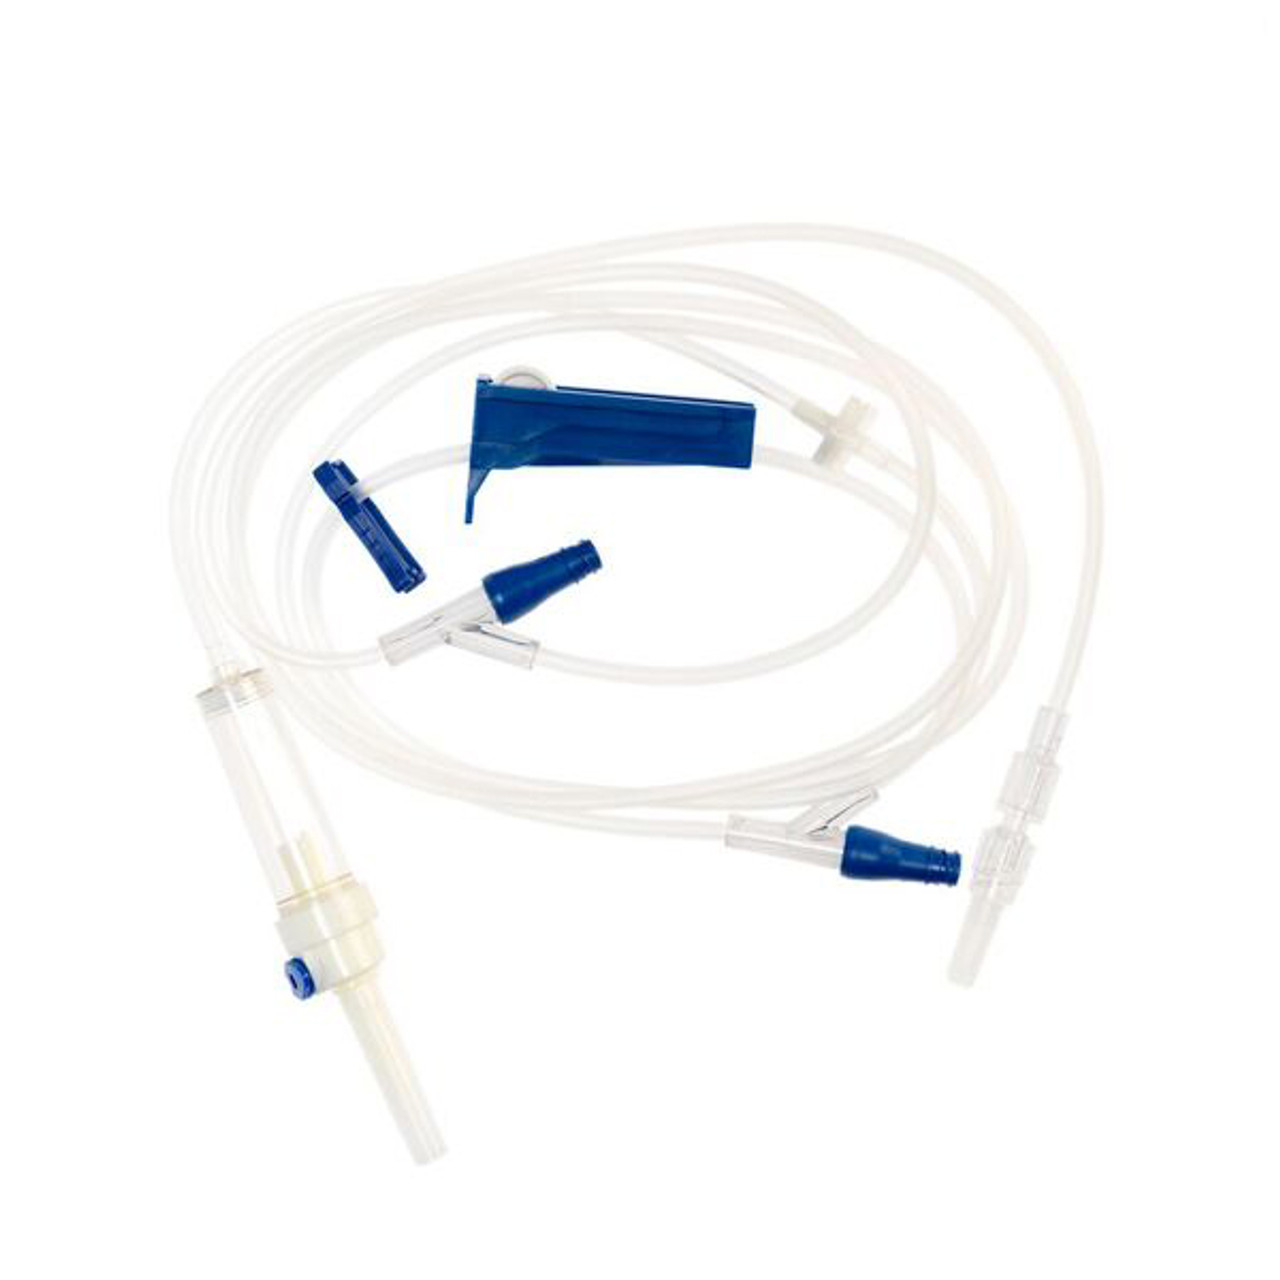 IV Administration Set With 2 Clave™ Needleless Access Ports • Box